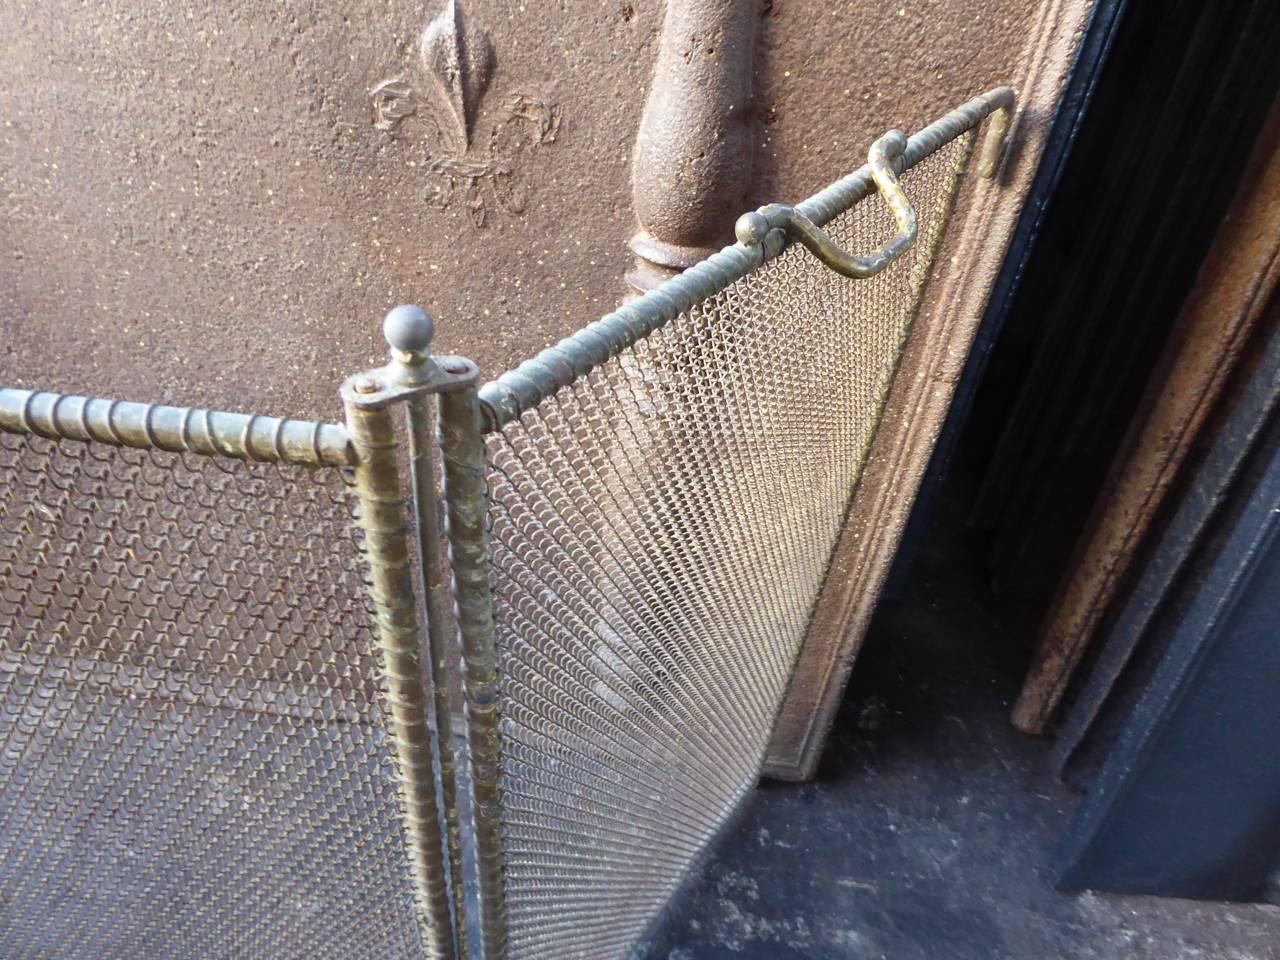 19th Century French Fireplace Screen or Fire Screen 4